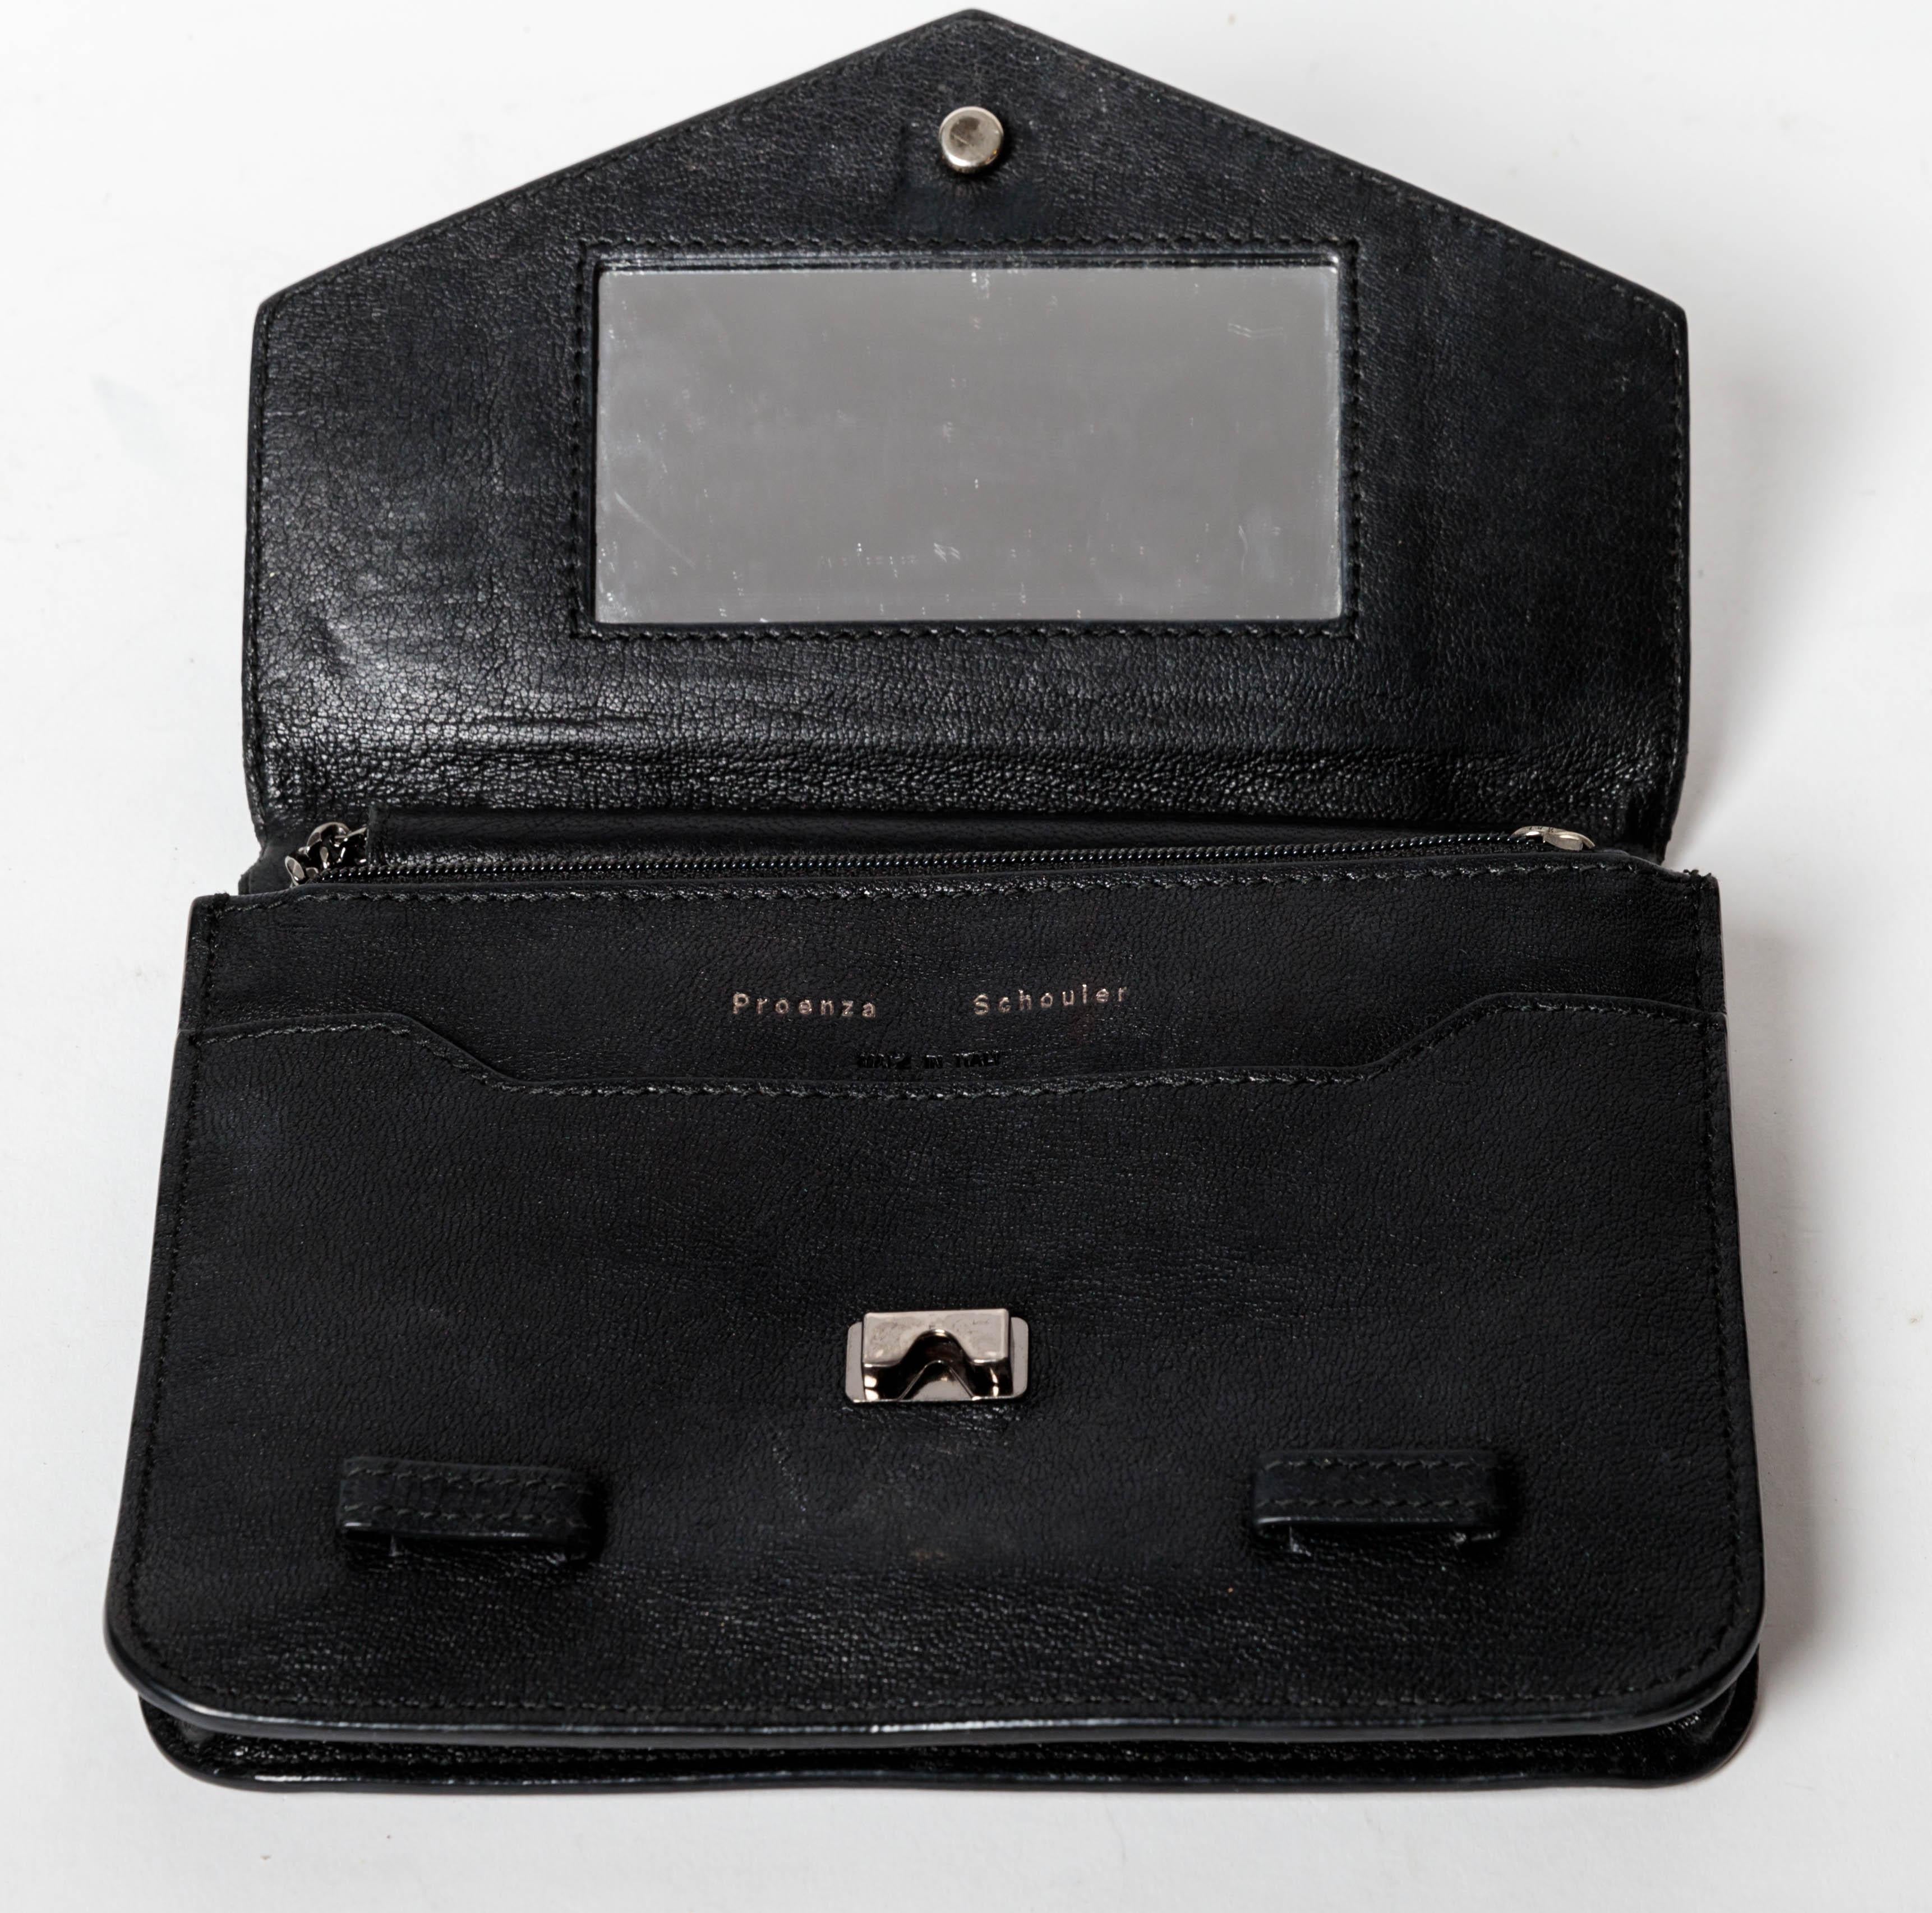 Black leather Proenza Schouler Wallet on a Chain.
Versatile and large enough to carry a phone, cards and some small essentials.
Includes interior zip pocket, slots for cards and a separate front flap pocket.
Great bag at a great price.
Excellent